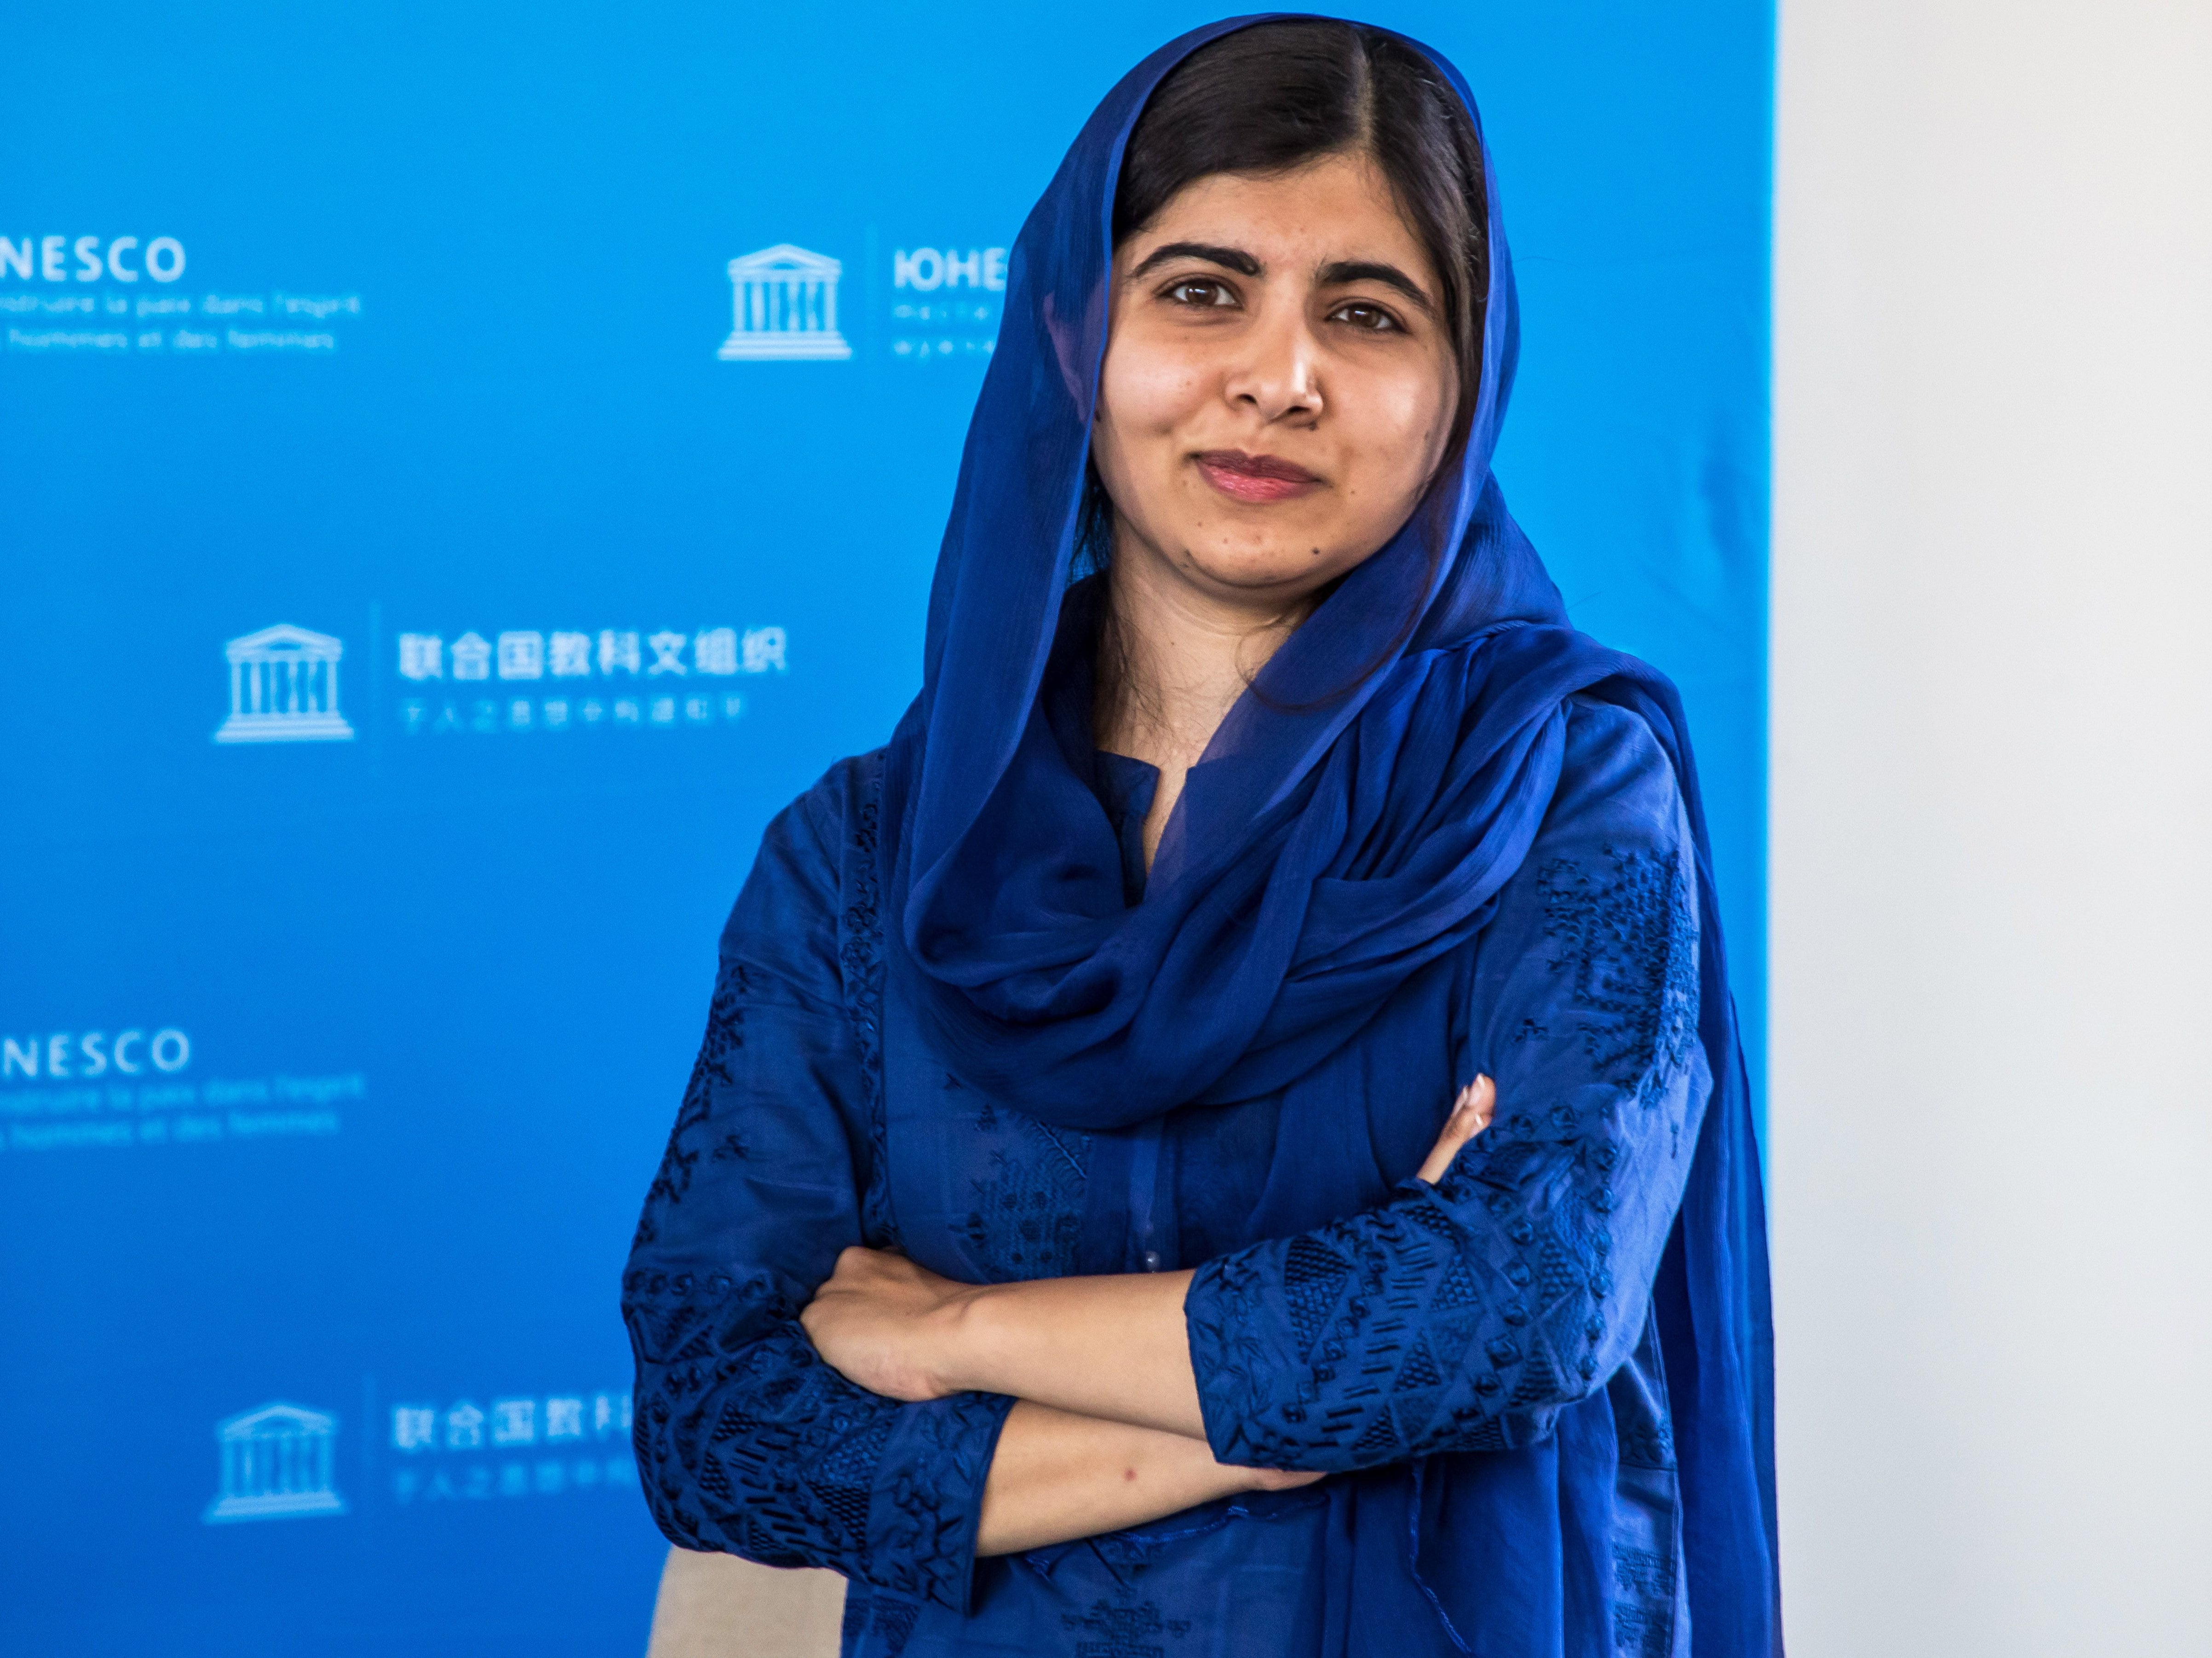 Malala became the youngest Nobel Peace Prize laureate in 2014